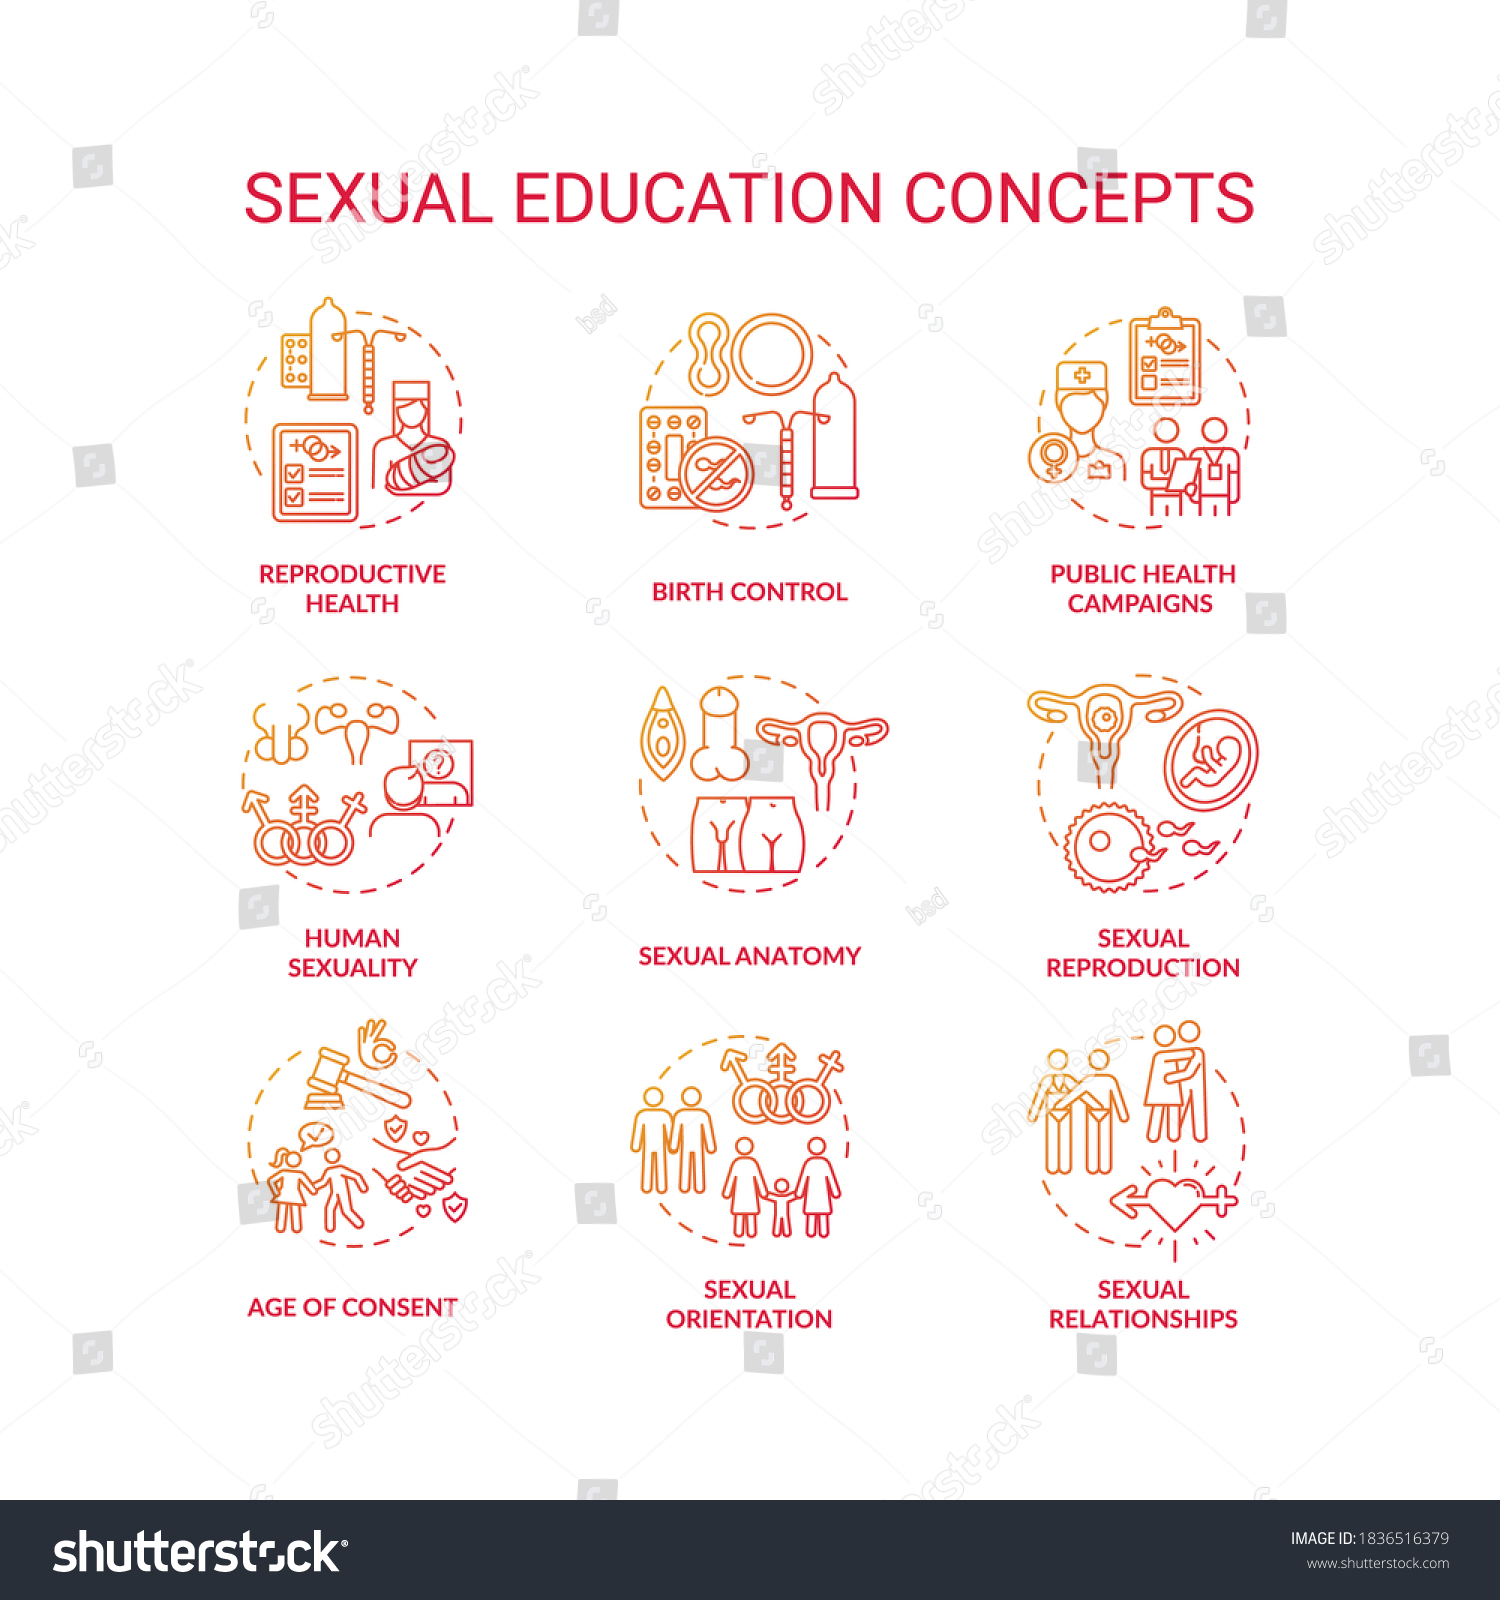 Sexual Education Concept Icons Set Human Stock Vector Royalty Free 1836516379 